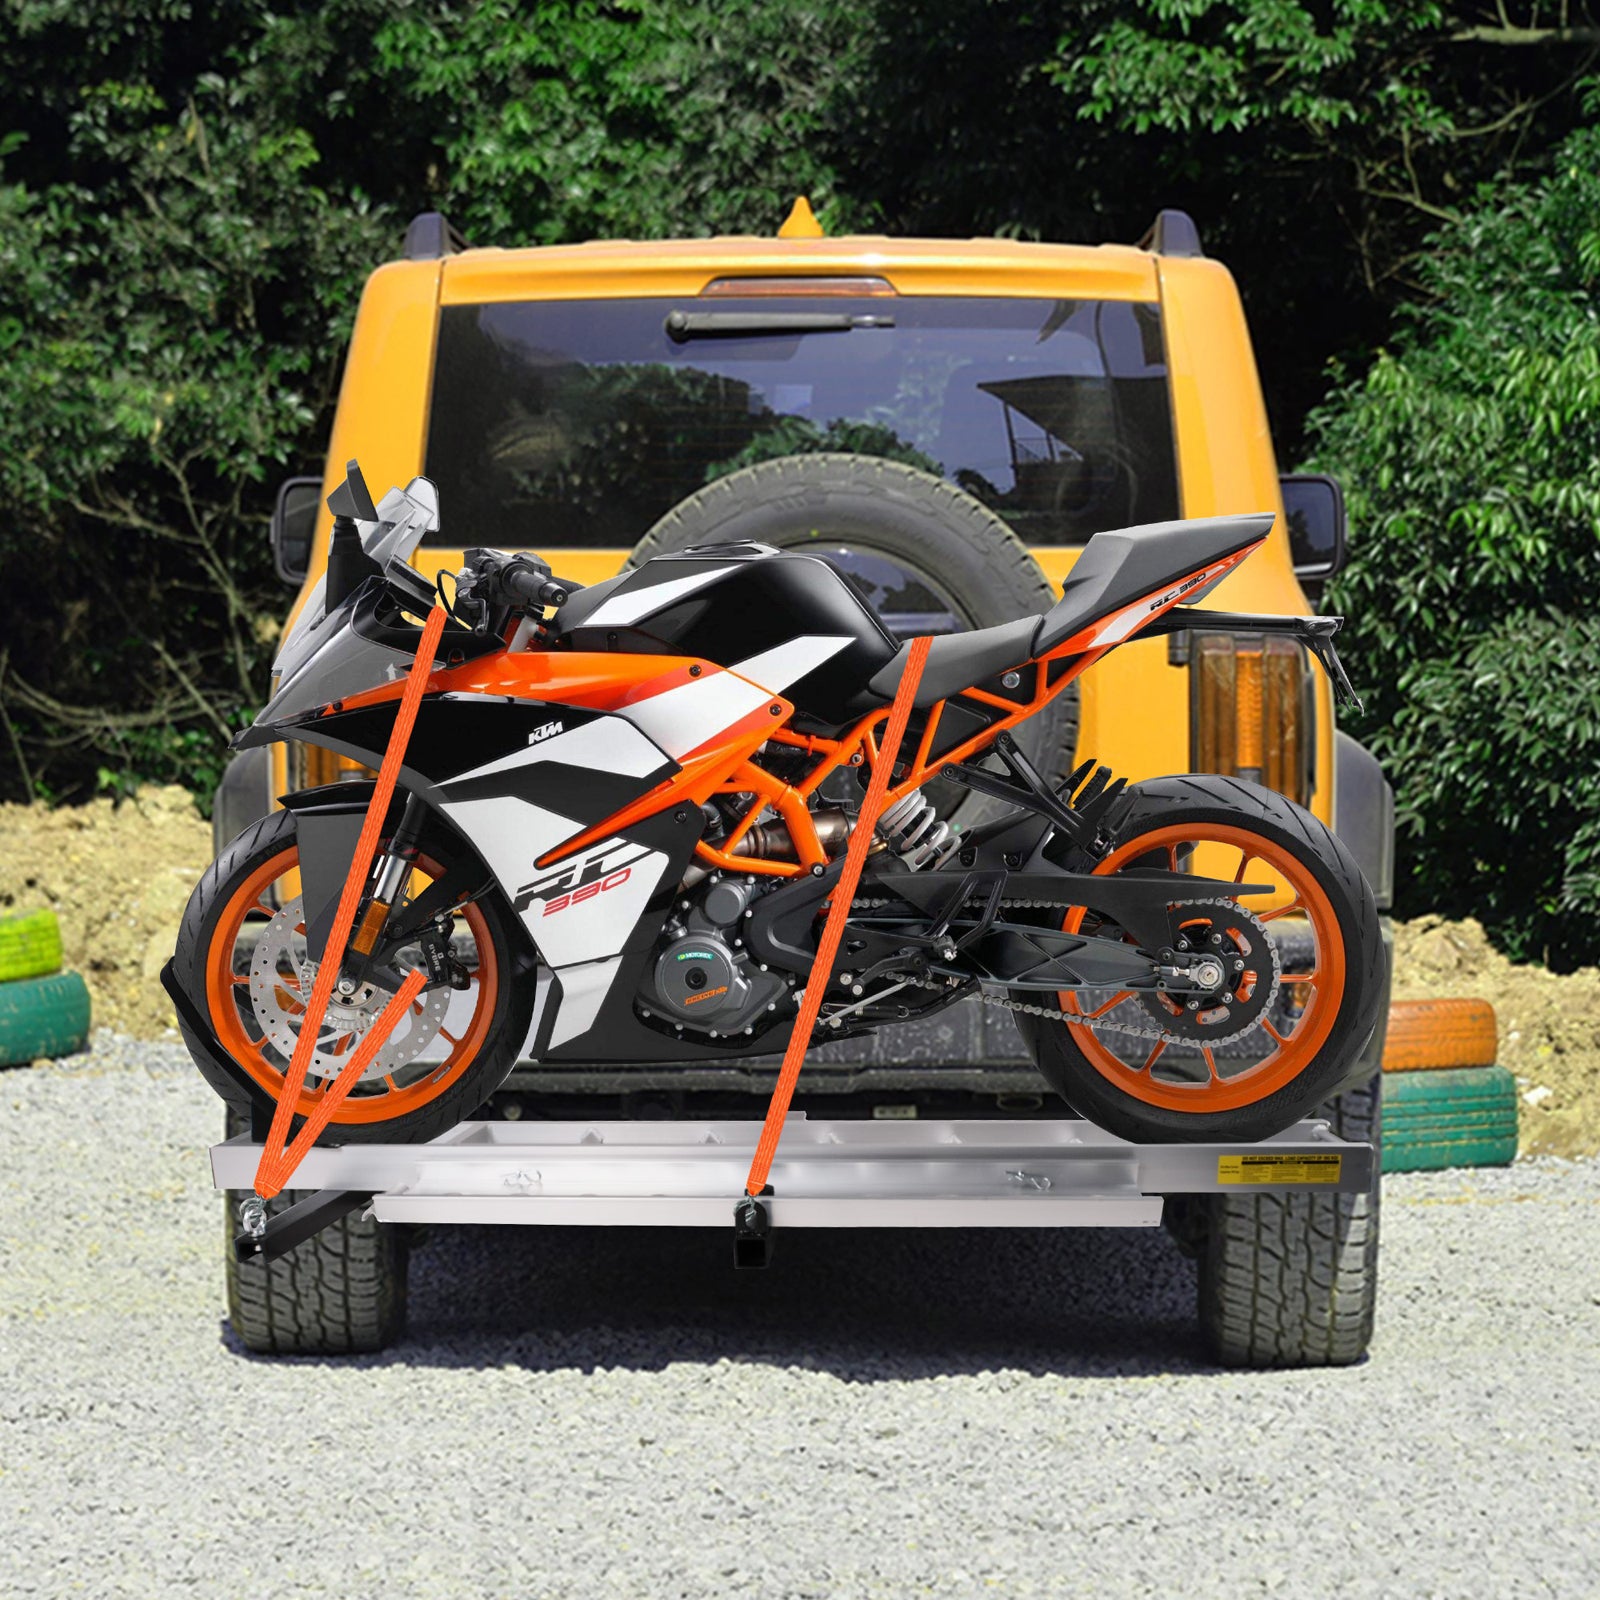 Hitch Mount Motorcycle Carrier Dirt Bike Scooter Carrier with Loading Ramp Wheel Lock